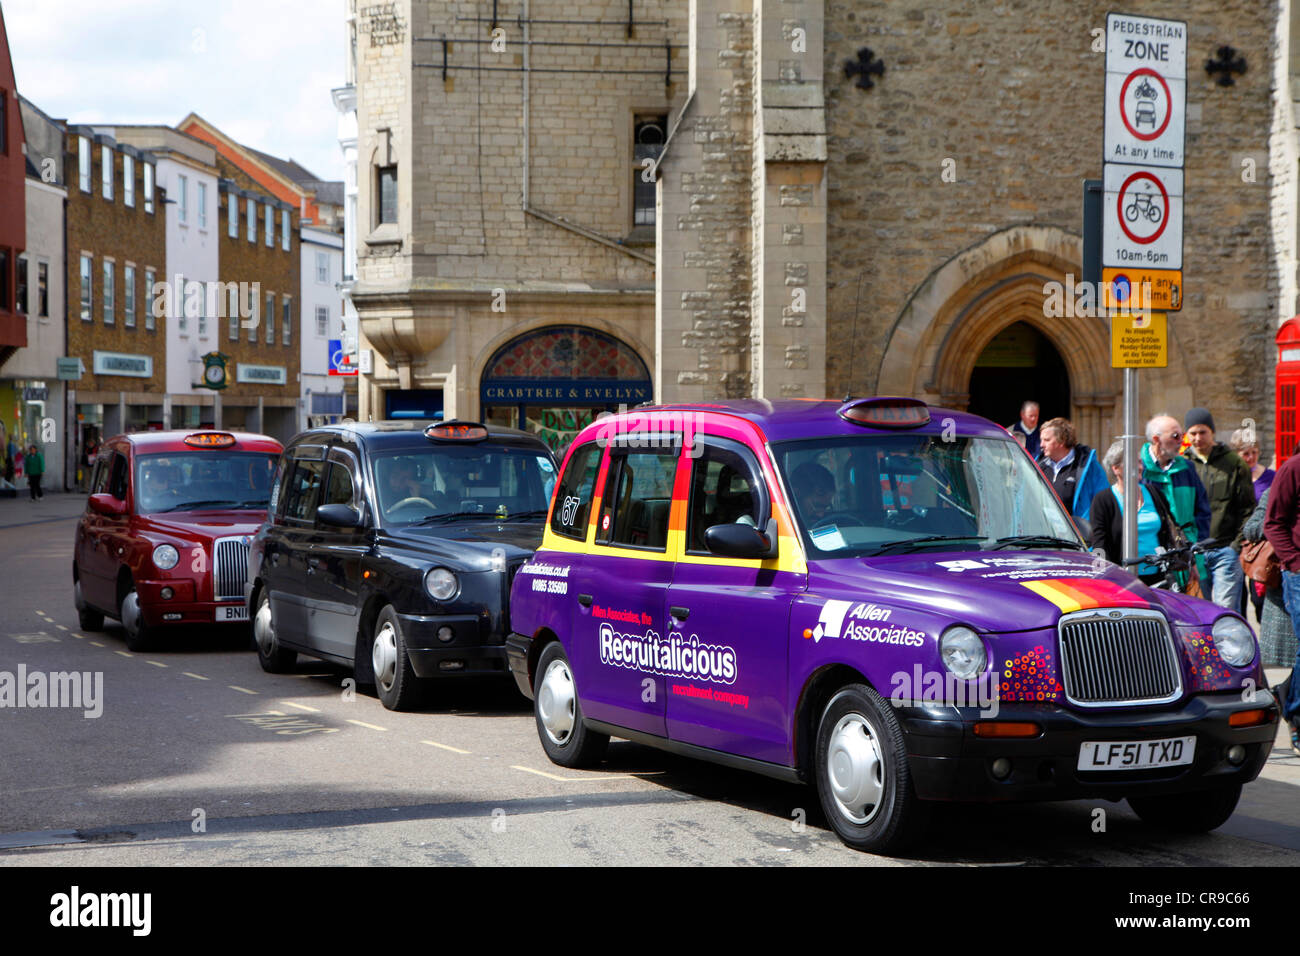 British taxi in modern design, painting. Oxford, Oxfordshire, UK, Europe Stock Photo